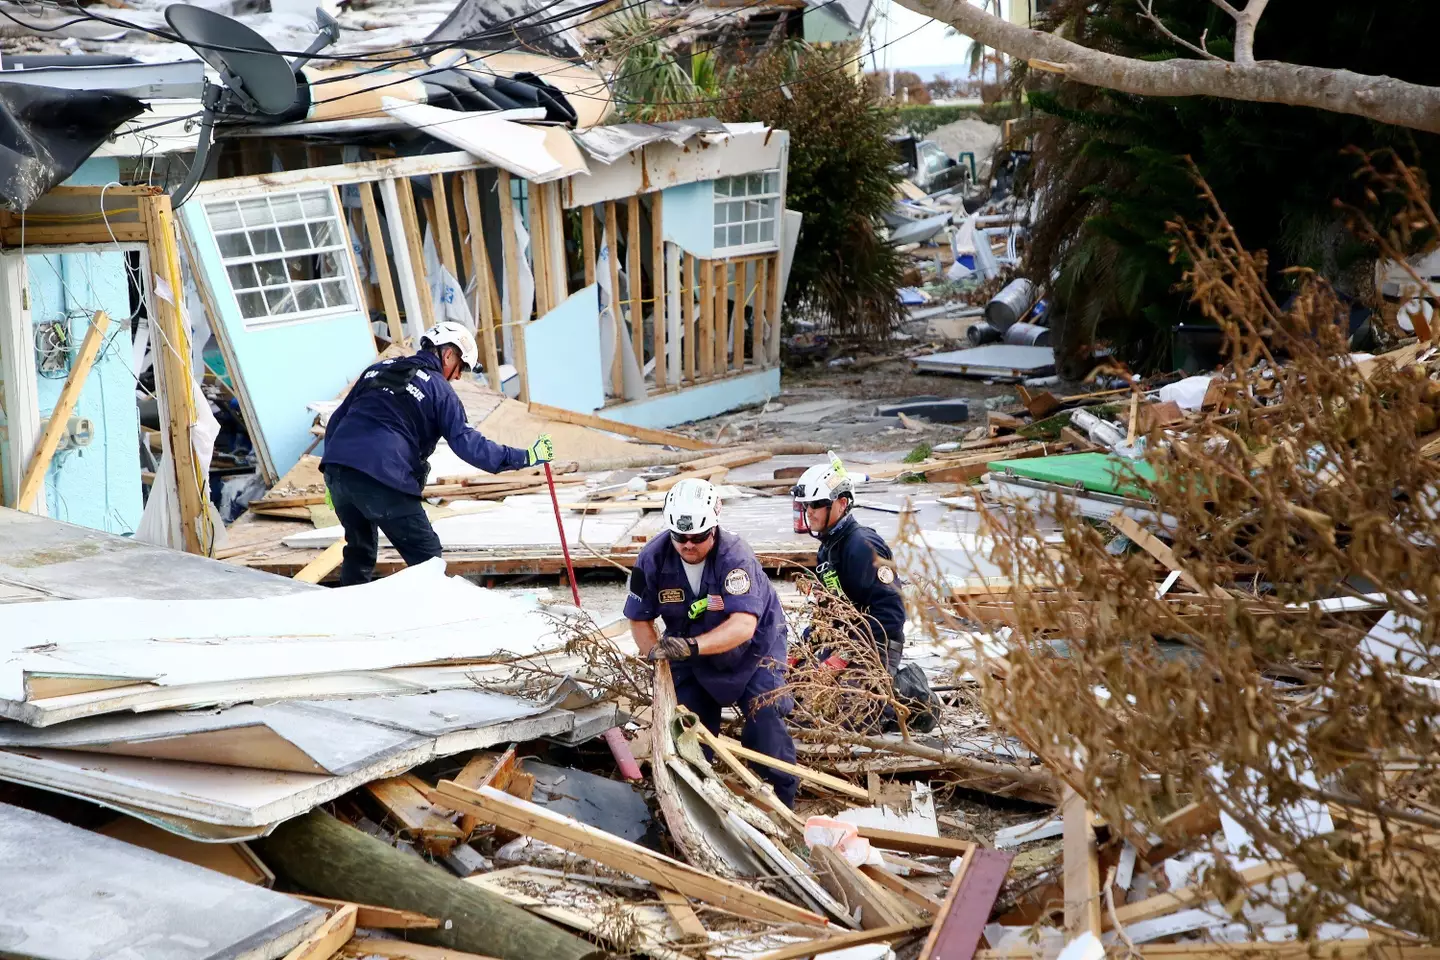 A number of people have been caught looting properties in the aftermath of Hurricane Ian's devastation.